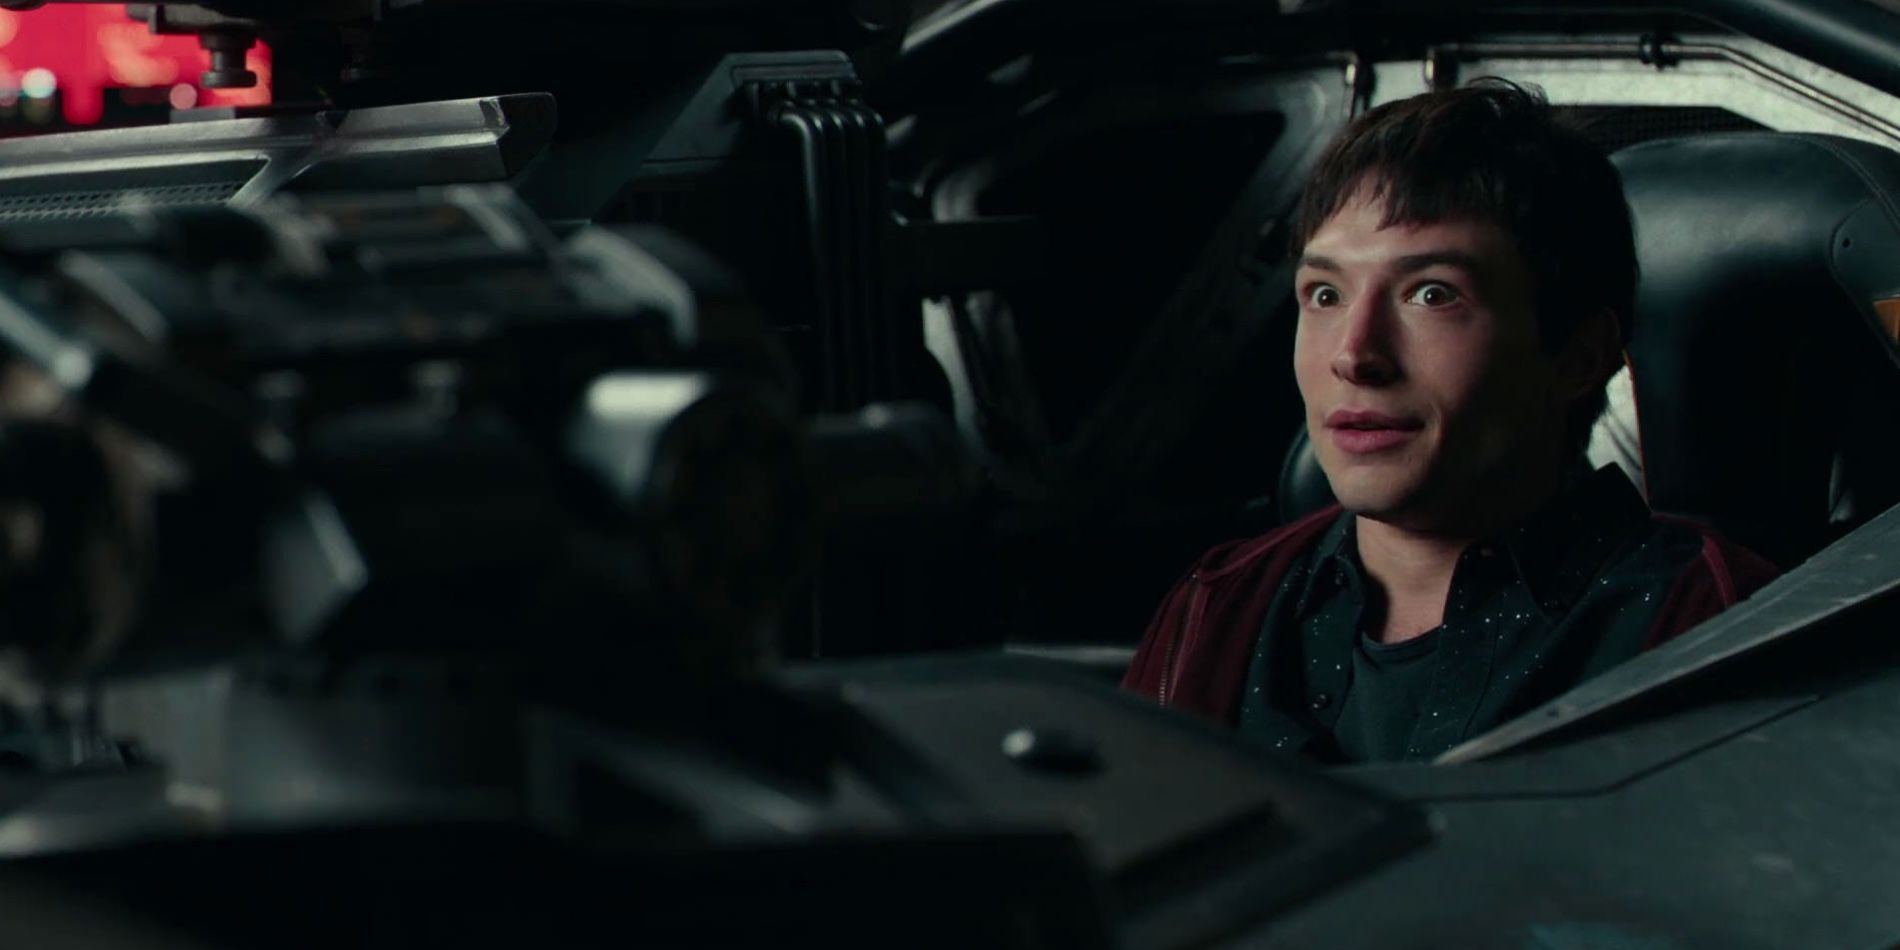 Barry Allen smiling while sitting in Batmobile